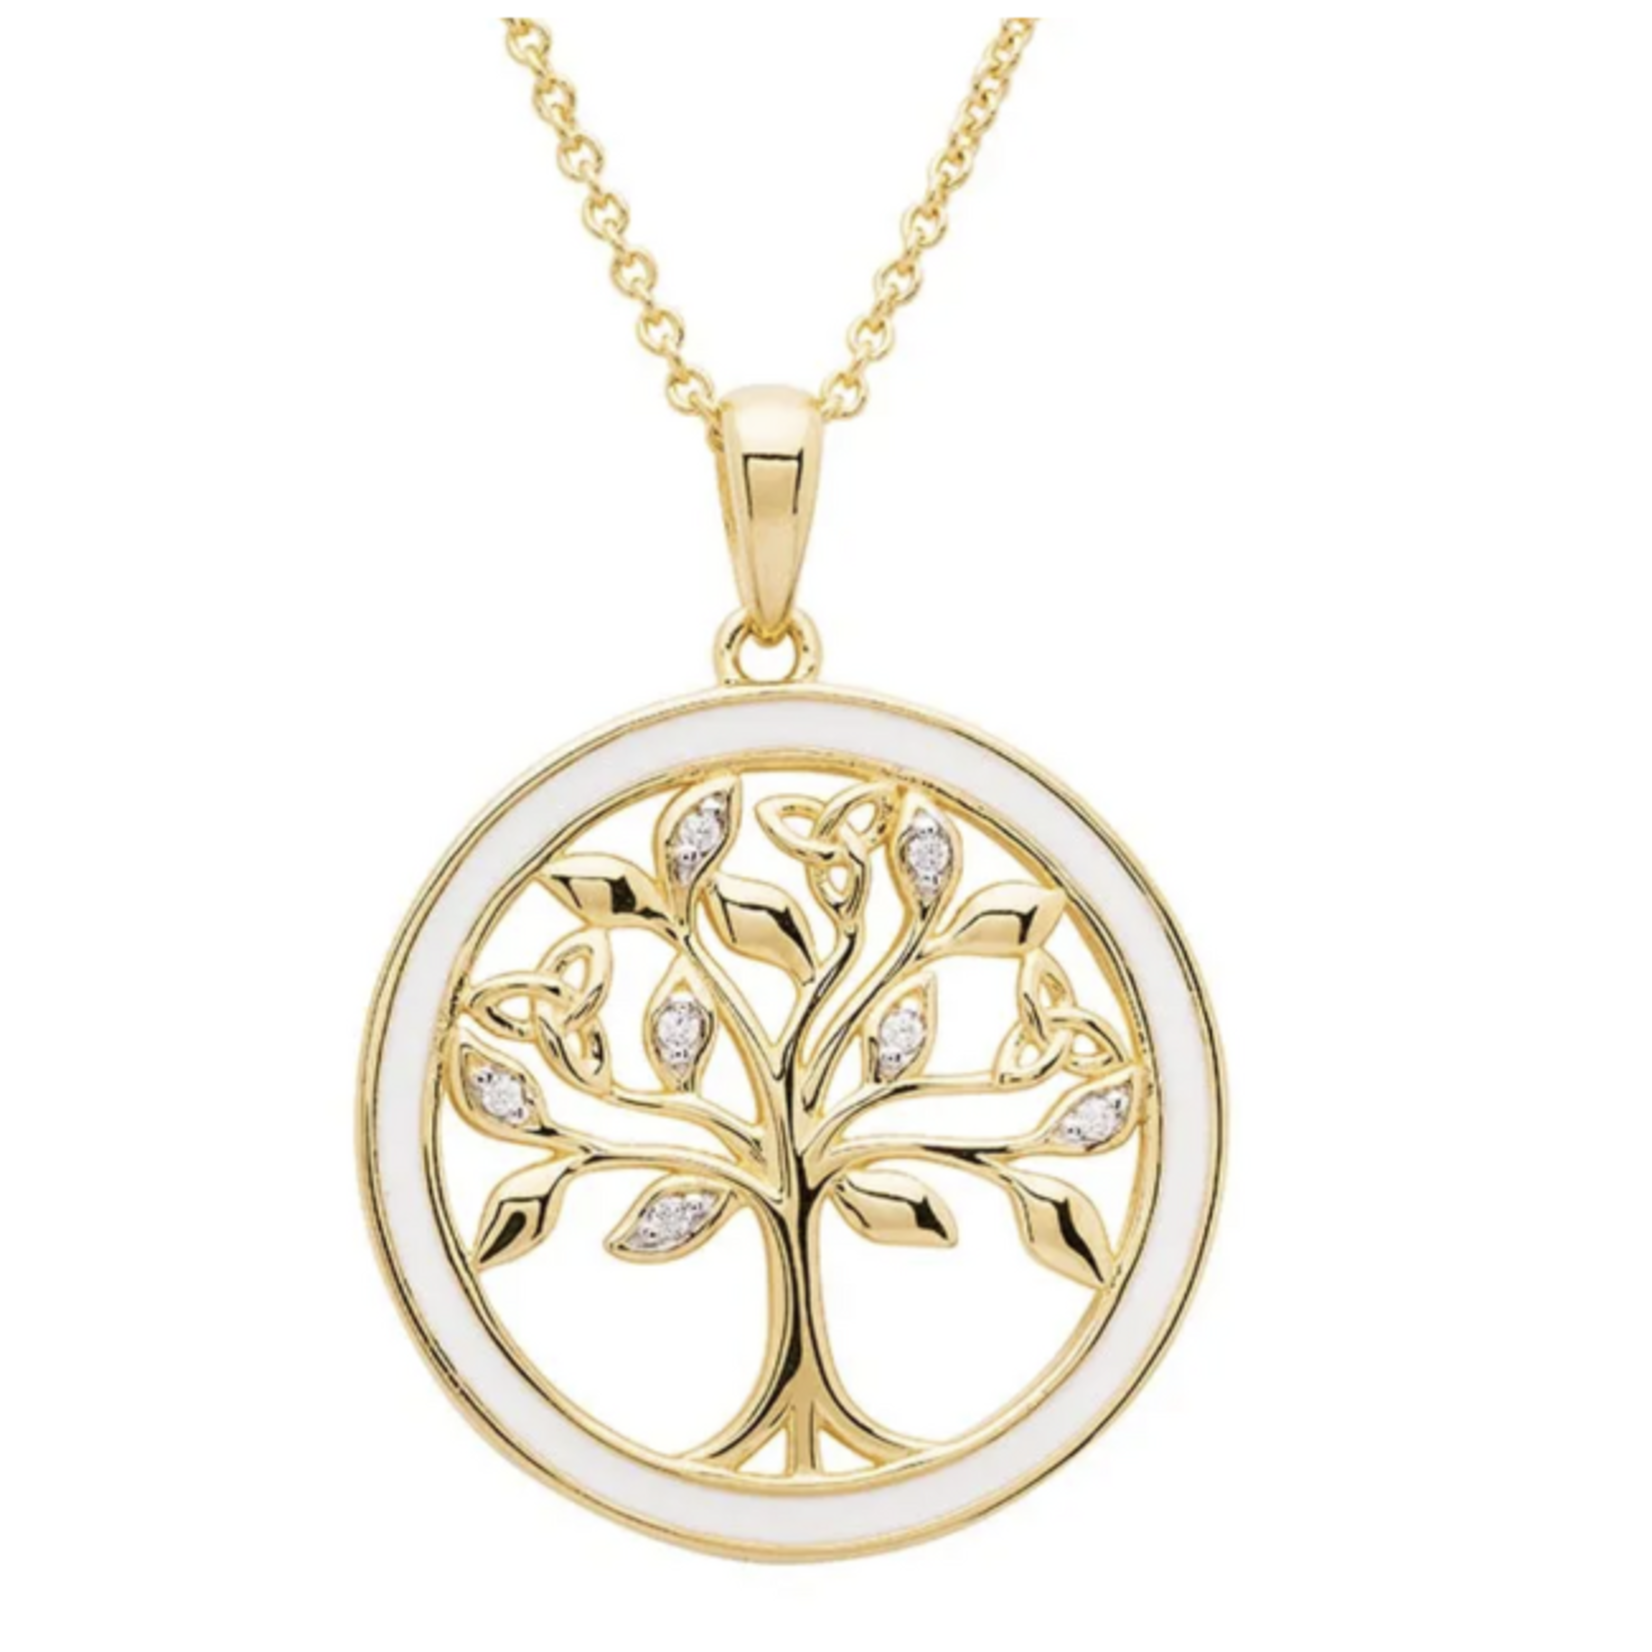 Shanore 14kt Gold Verm. Tree of Life Necklace